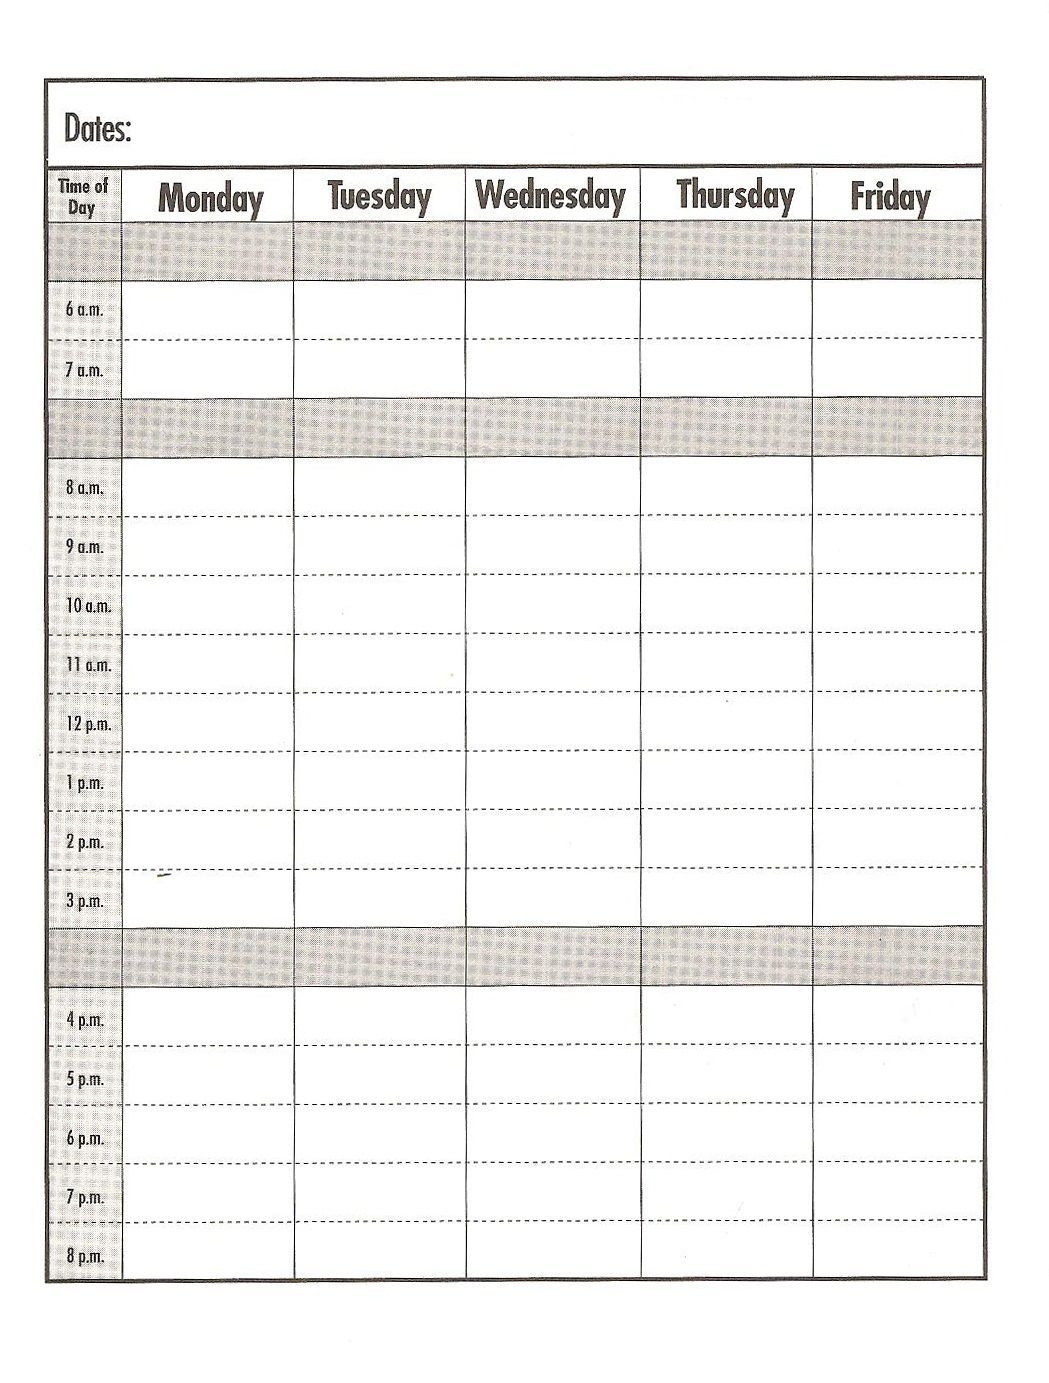 weekday #schedule template/print out #education #school